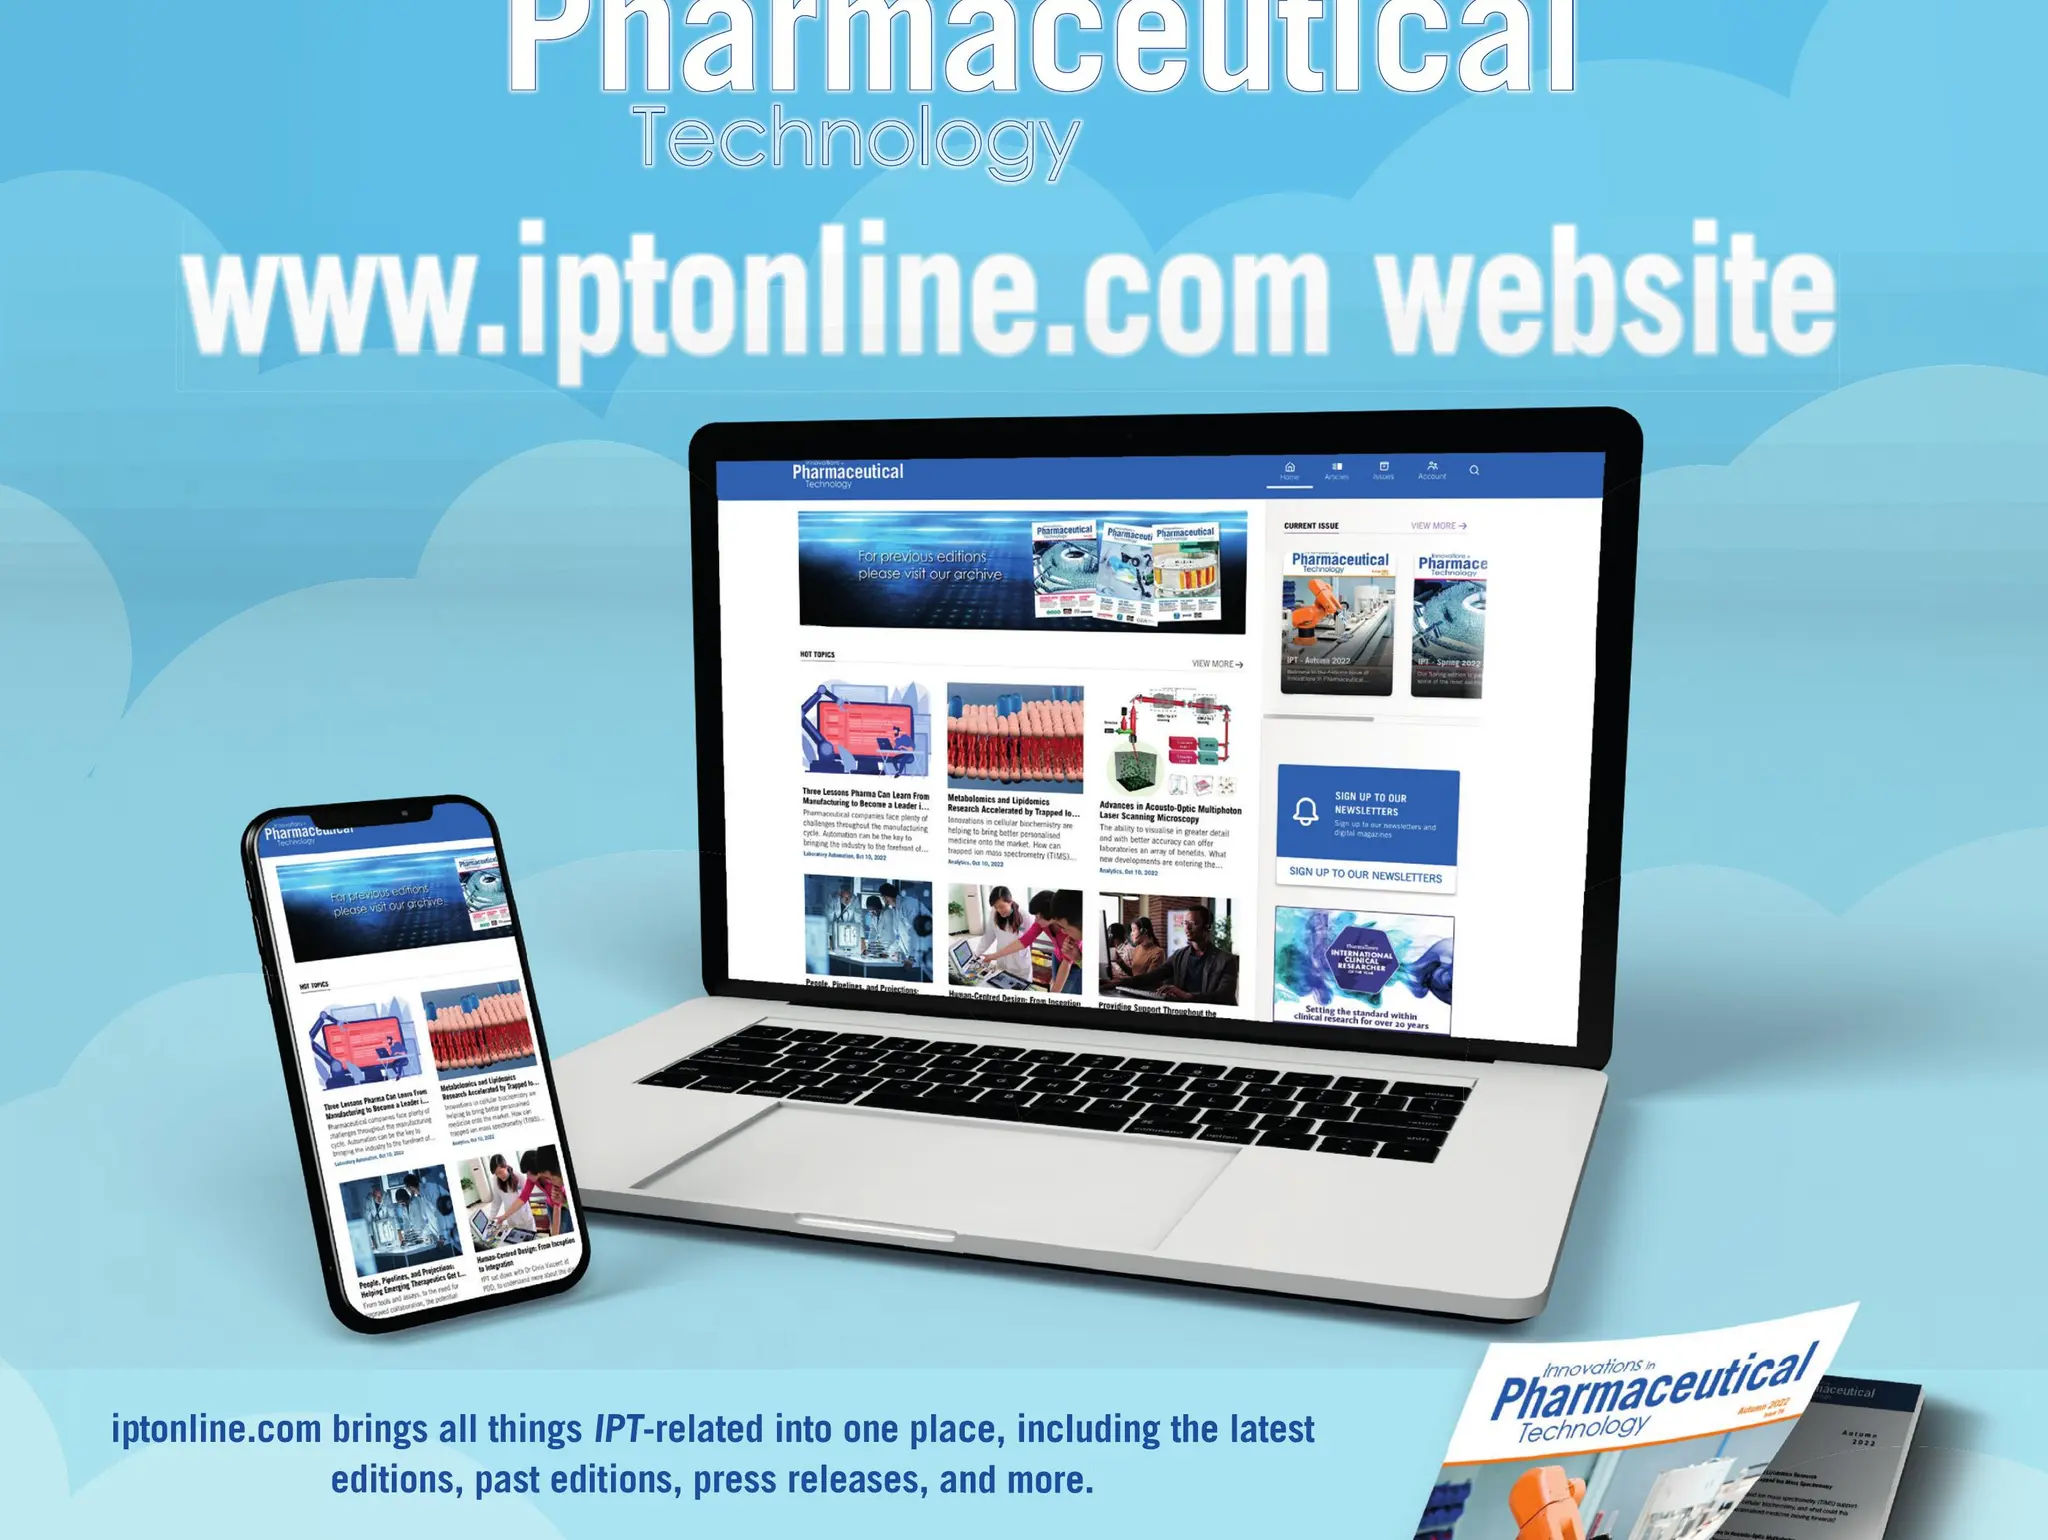 Innovations in Pharmaceutical Technology